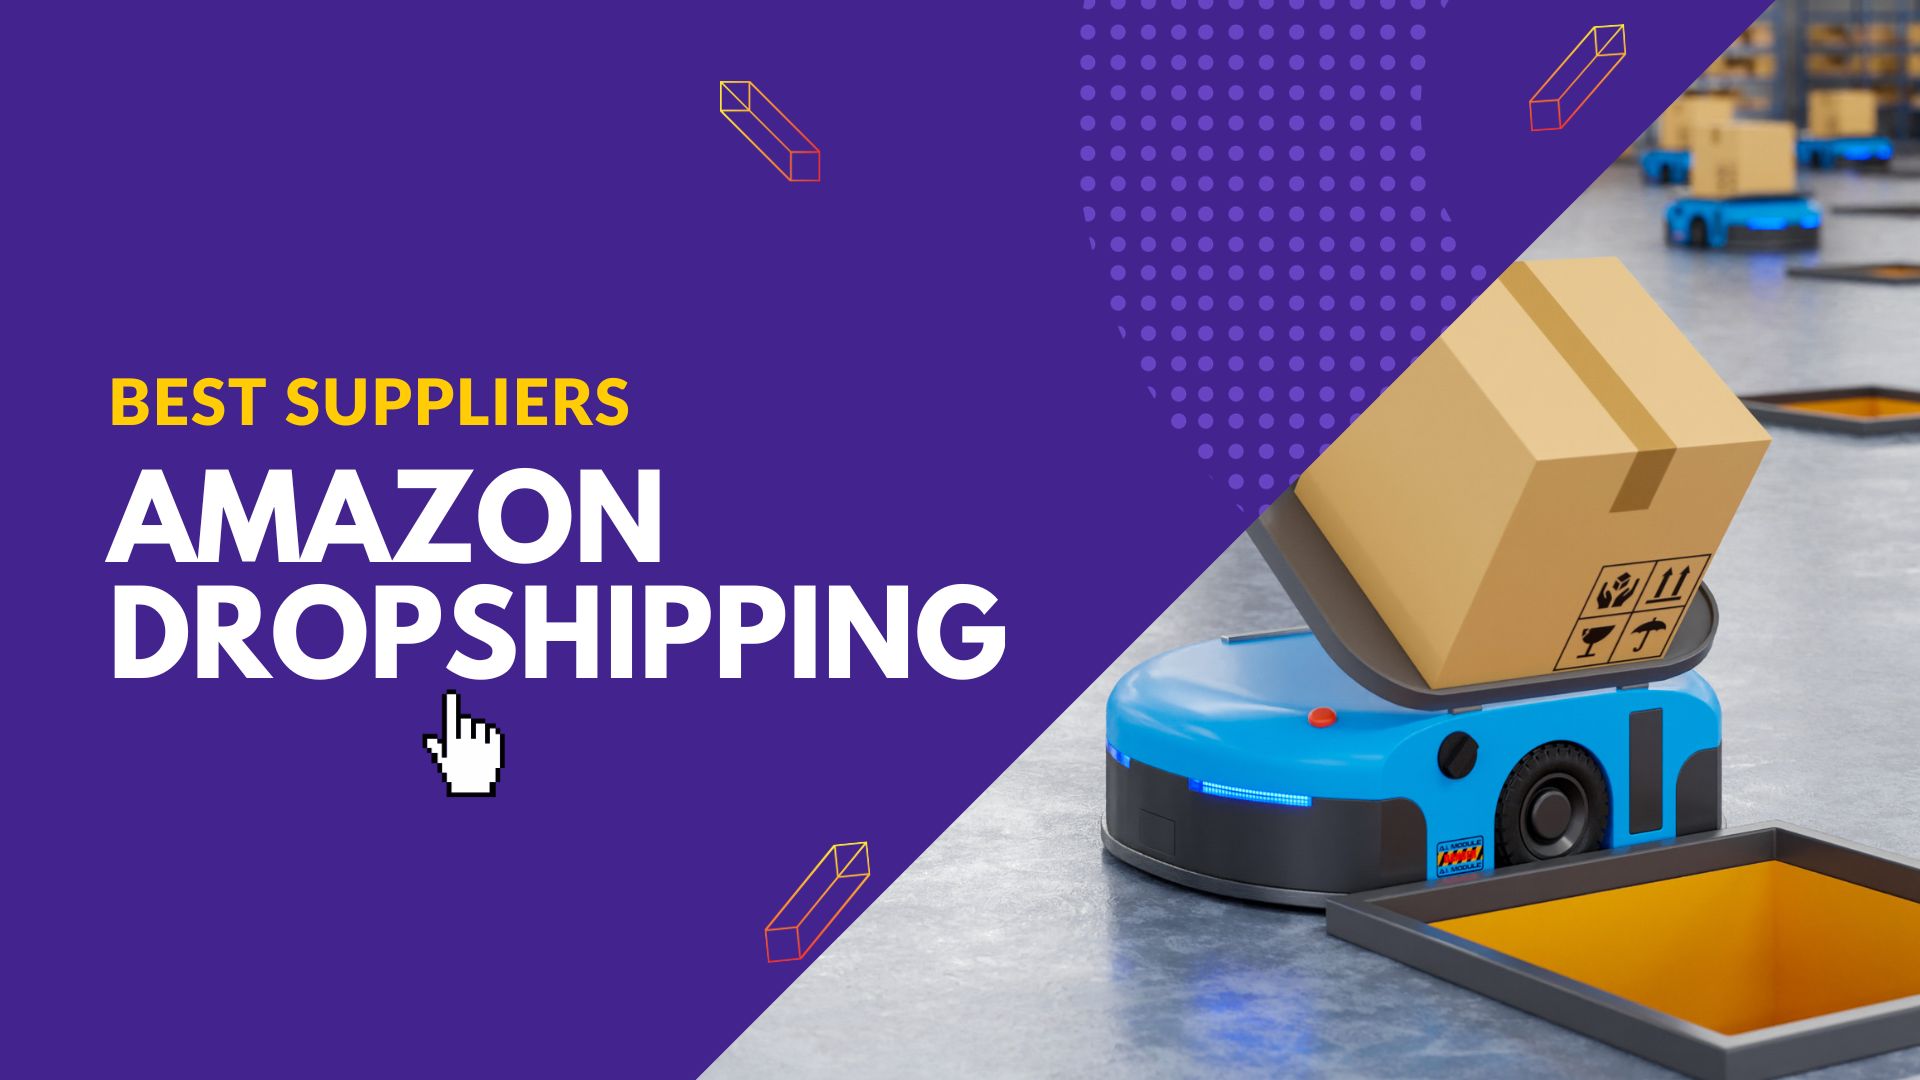 Best Suppliers for Amazon Dropshipping